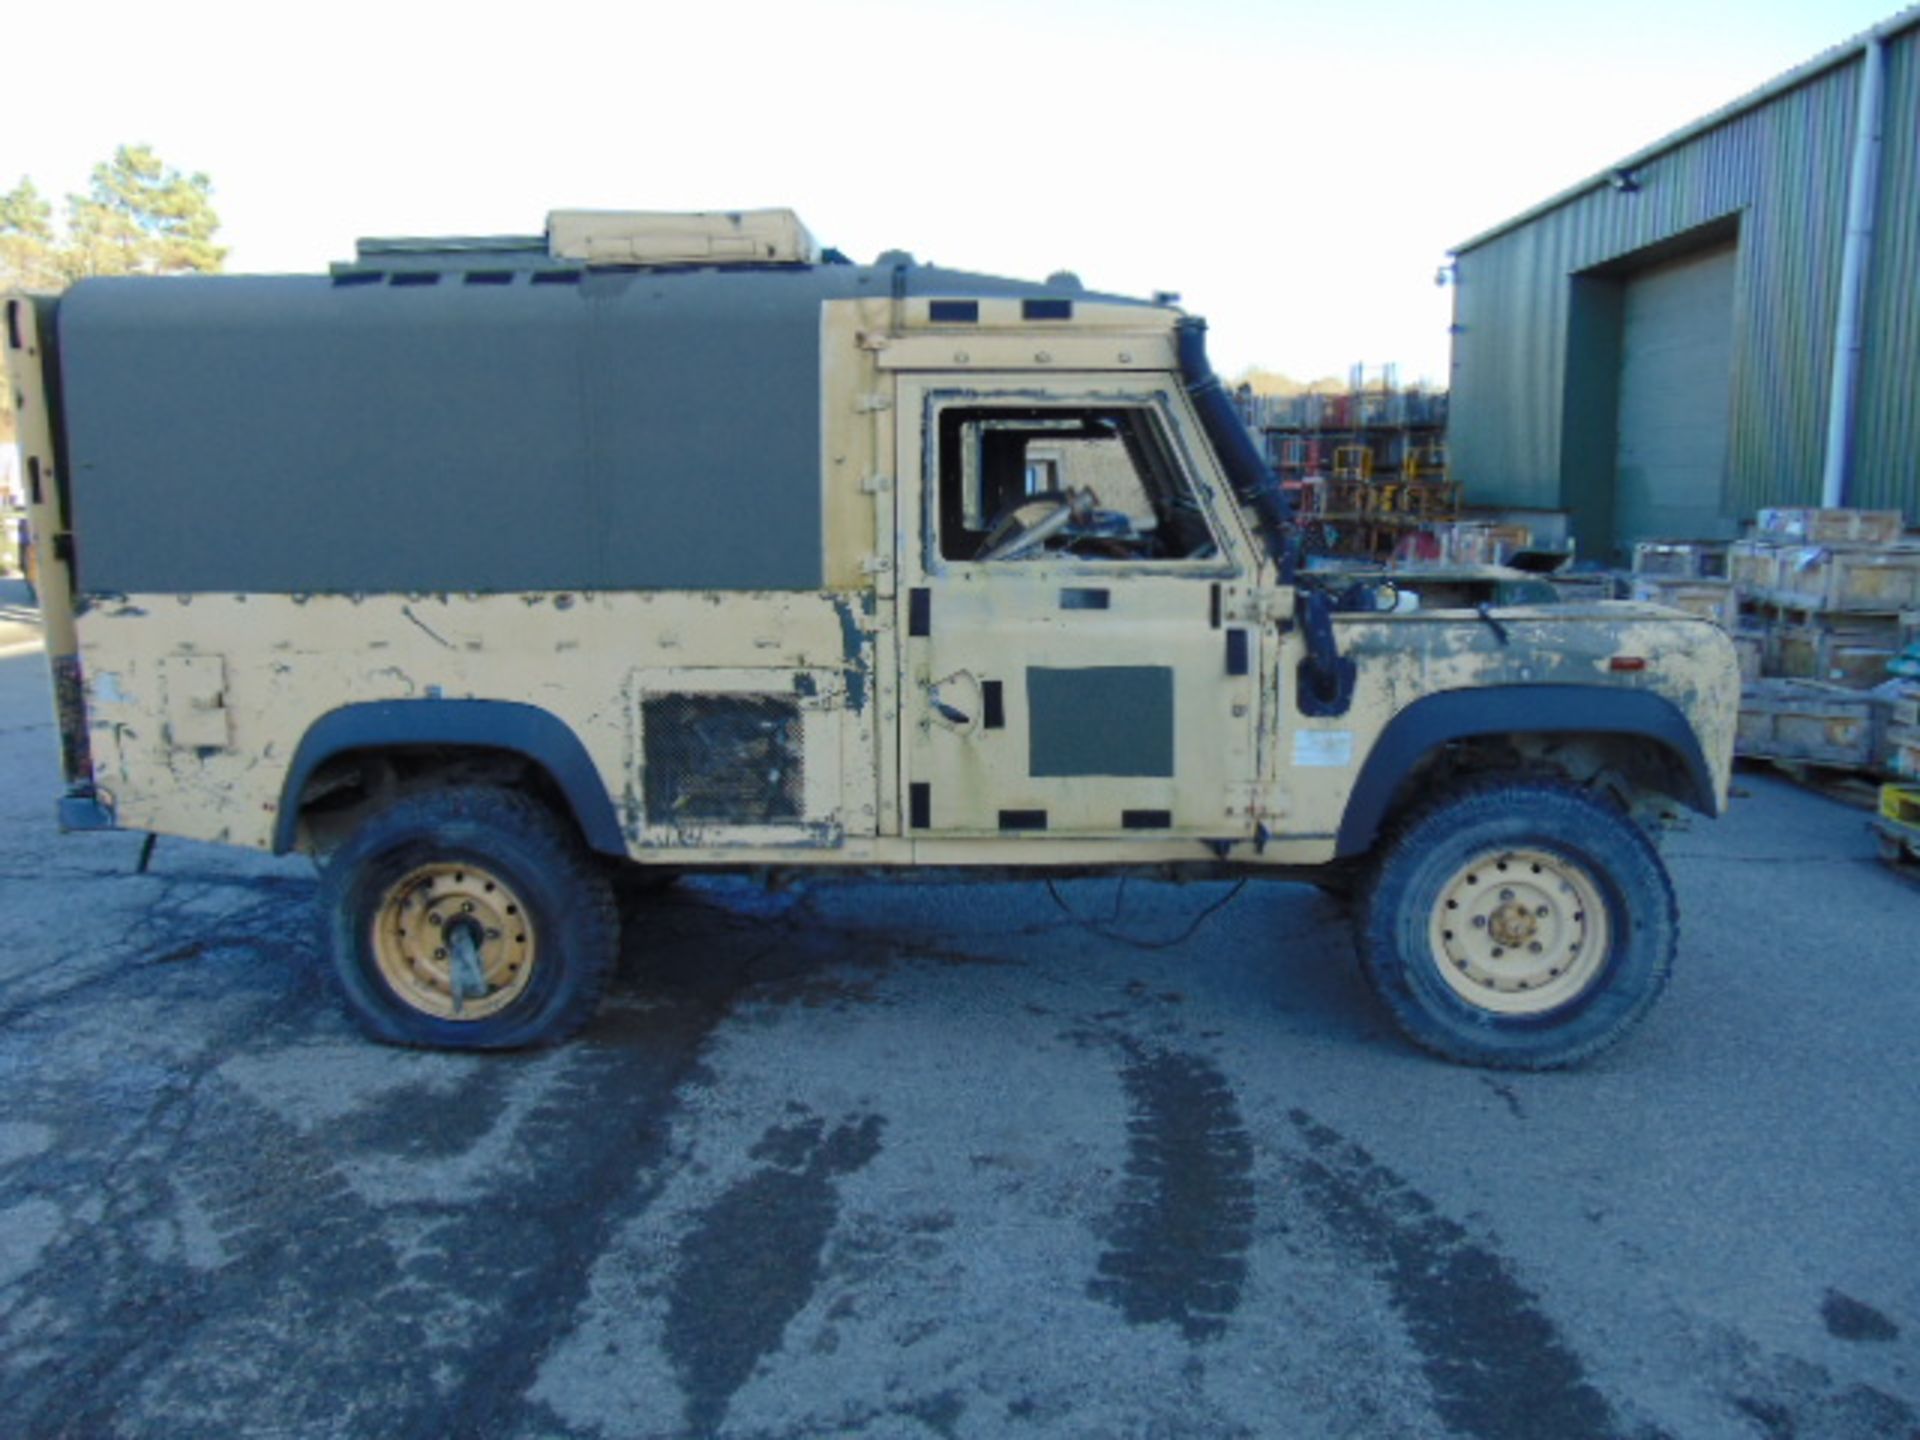 Very Rare Direct from Service Unmanned Landrover 110 300TDi Panama Snatch-2A - Image 5 of 11